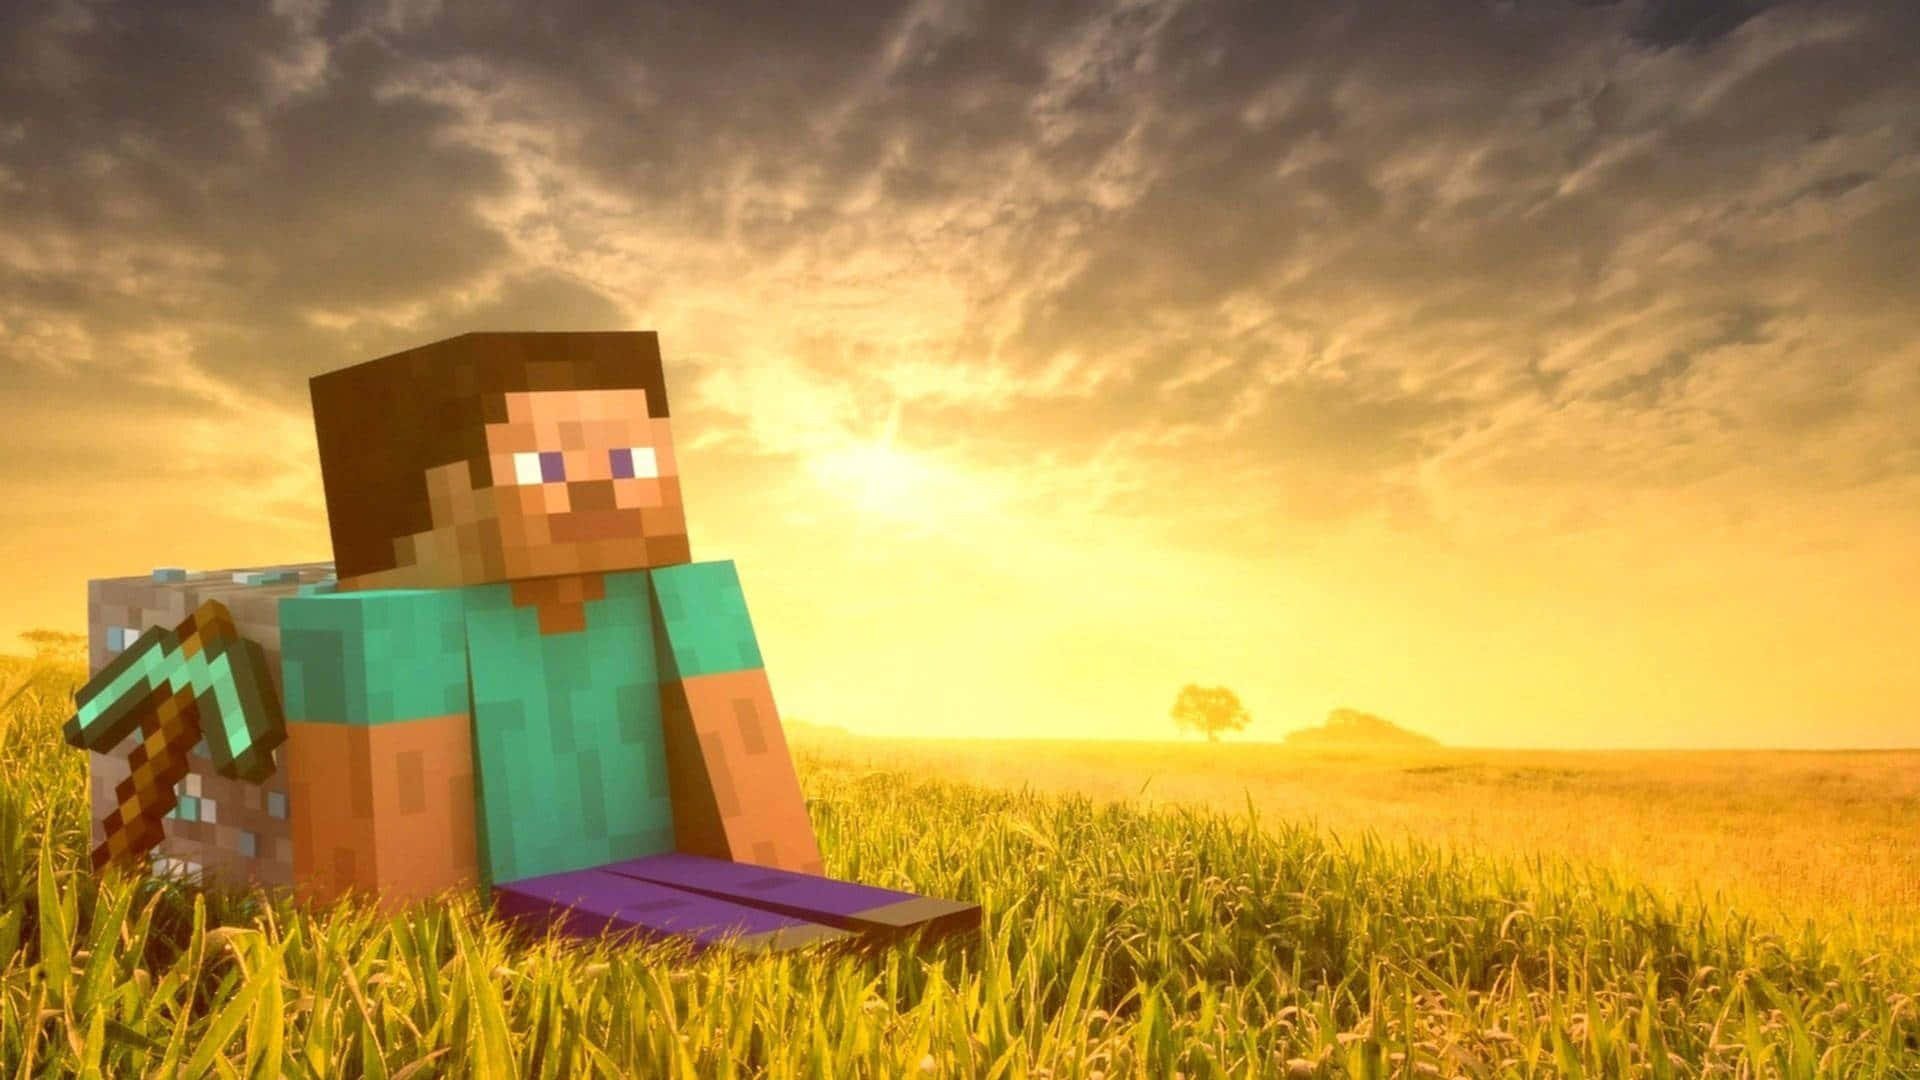 The beauty of sunset in Minecraft. Wallpaper